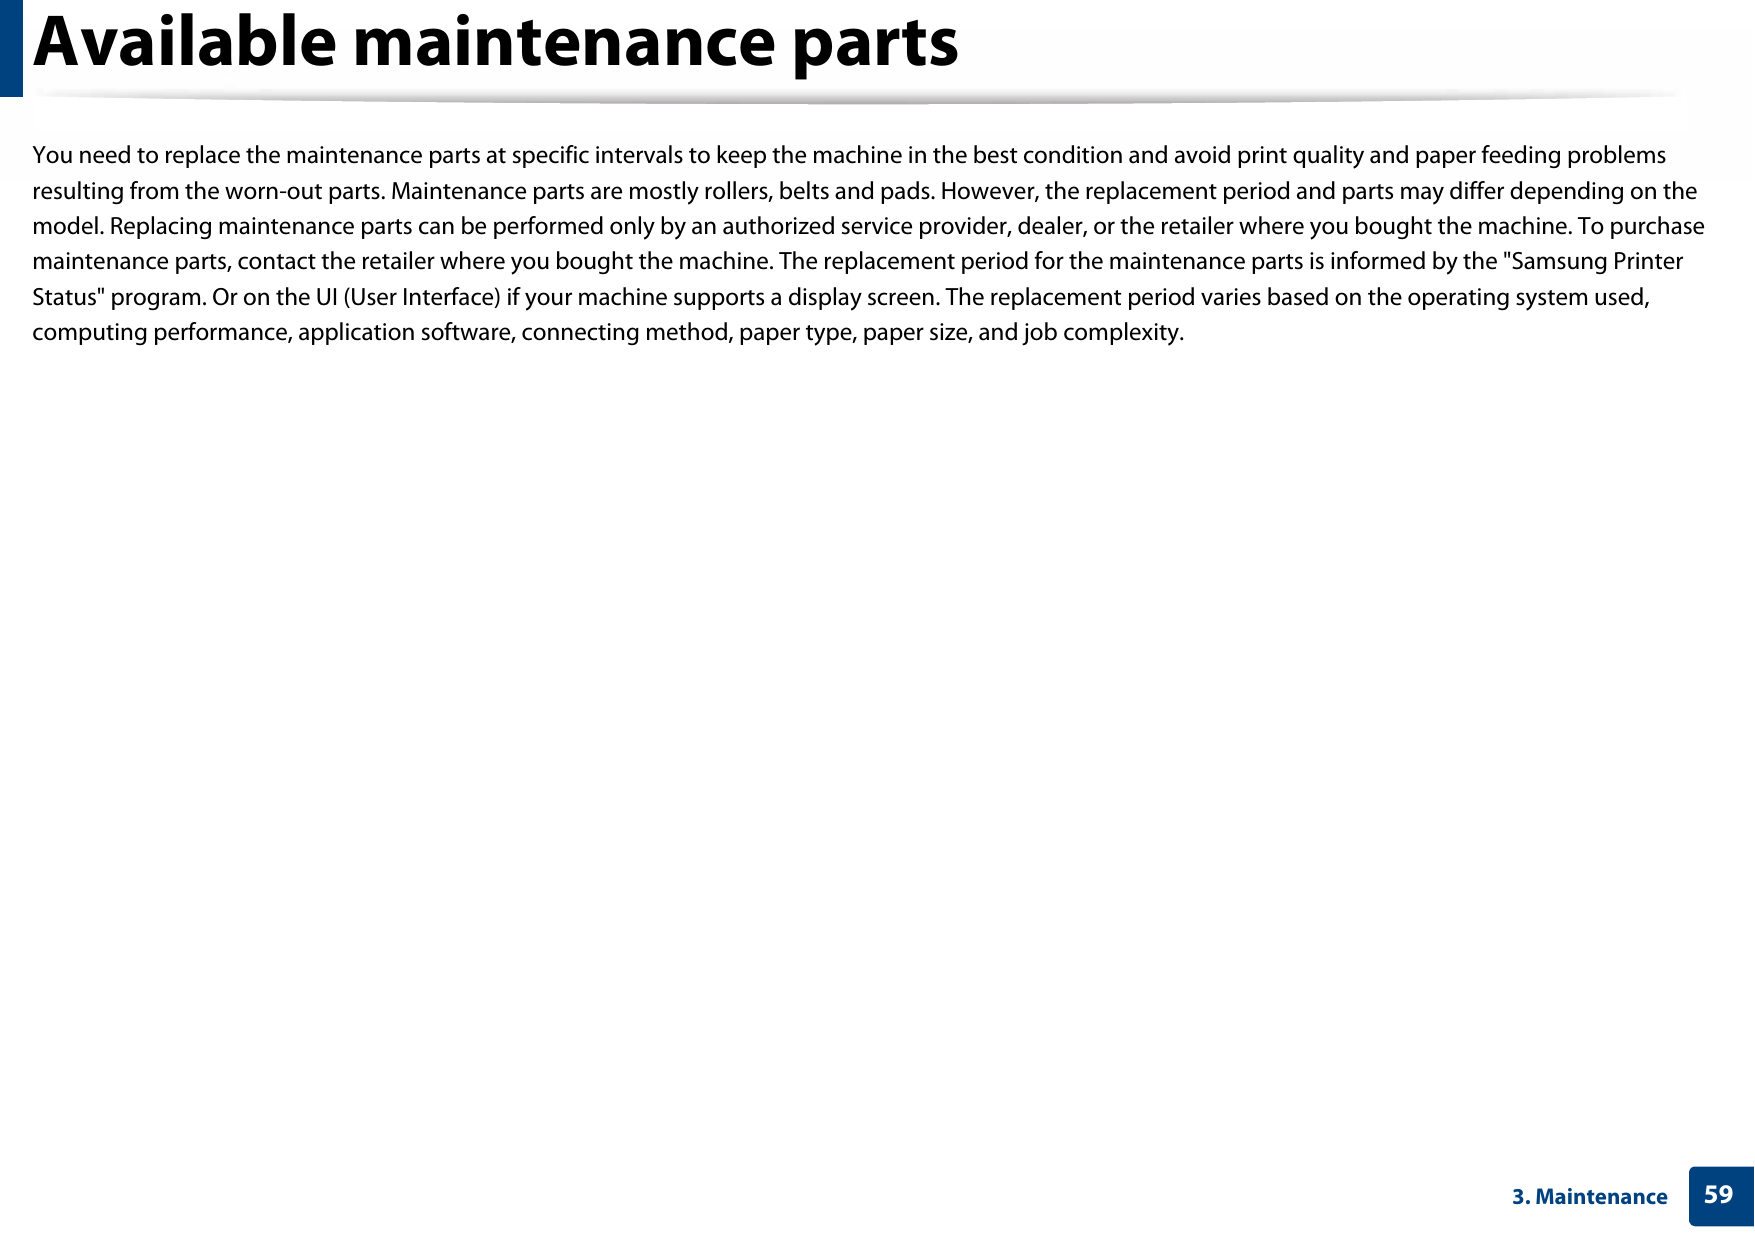 593. MaintenanceAvailable maintenance partsYou need to replace the maintenance parts at specific intervals to keep the machine in the best condition and avoid print quality and paper feeding problems resulting from the worn-out parts. Maintenance parts are mostly rollers, belts and pads. However, the replacement period and parts may differ depending on the model. Replacing maintenance parts can be performed only by an authorized service provider, dealer, or the retailer where you bought the machine. To purchase maintenance parts, contact the retailer where you bought the machine. The replacement period for the maintenance parts is informed by the &quot;Samsung Printer Status&quot; program. Or on the UI (User Interface) if your machine supports a display screen. The replacement period varies based on the operating system used, computing performance, application software, connecting method, paper type, paper size, and job complexity.